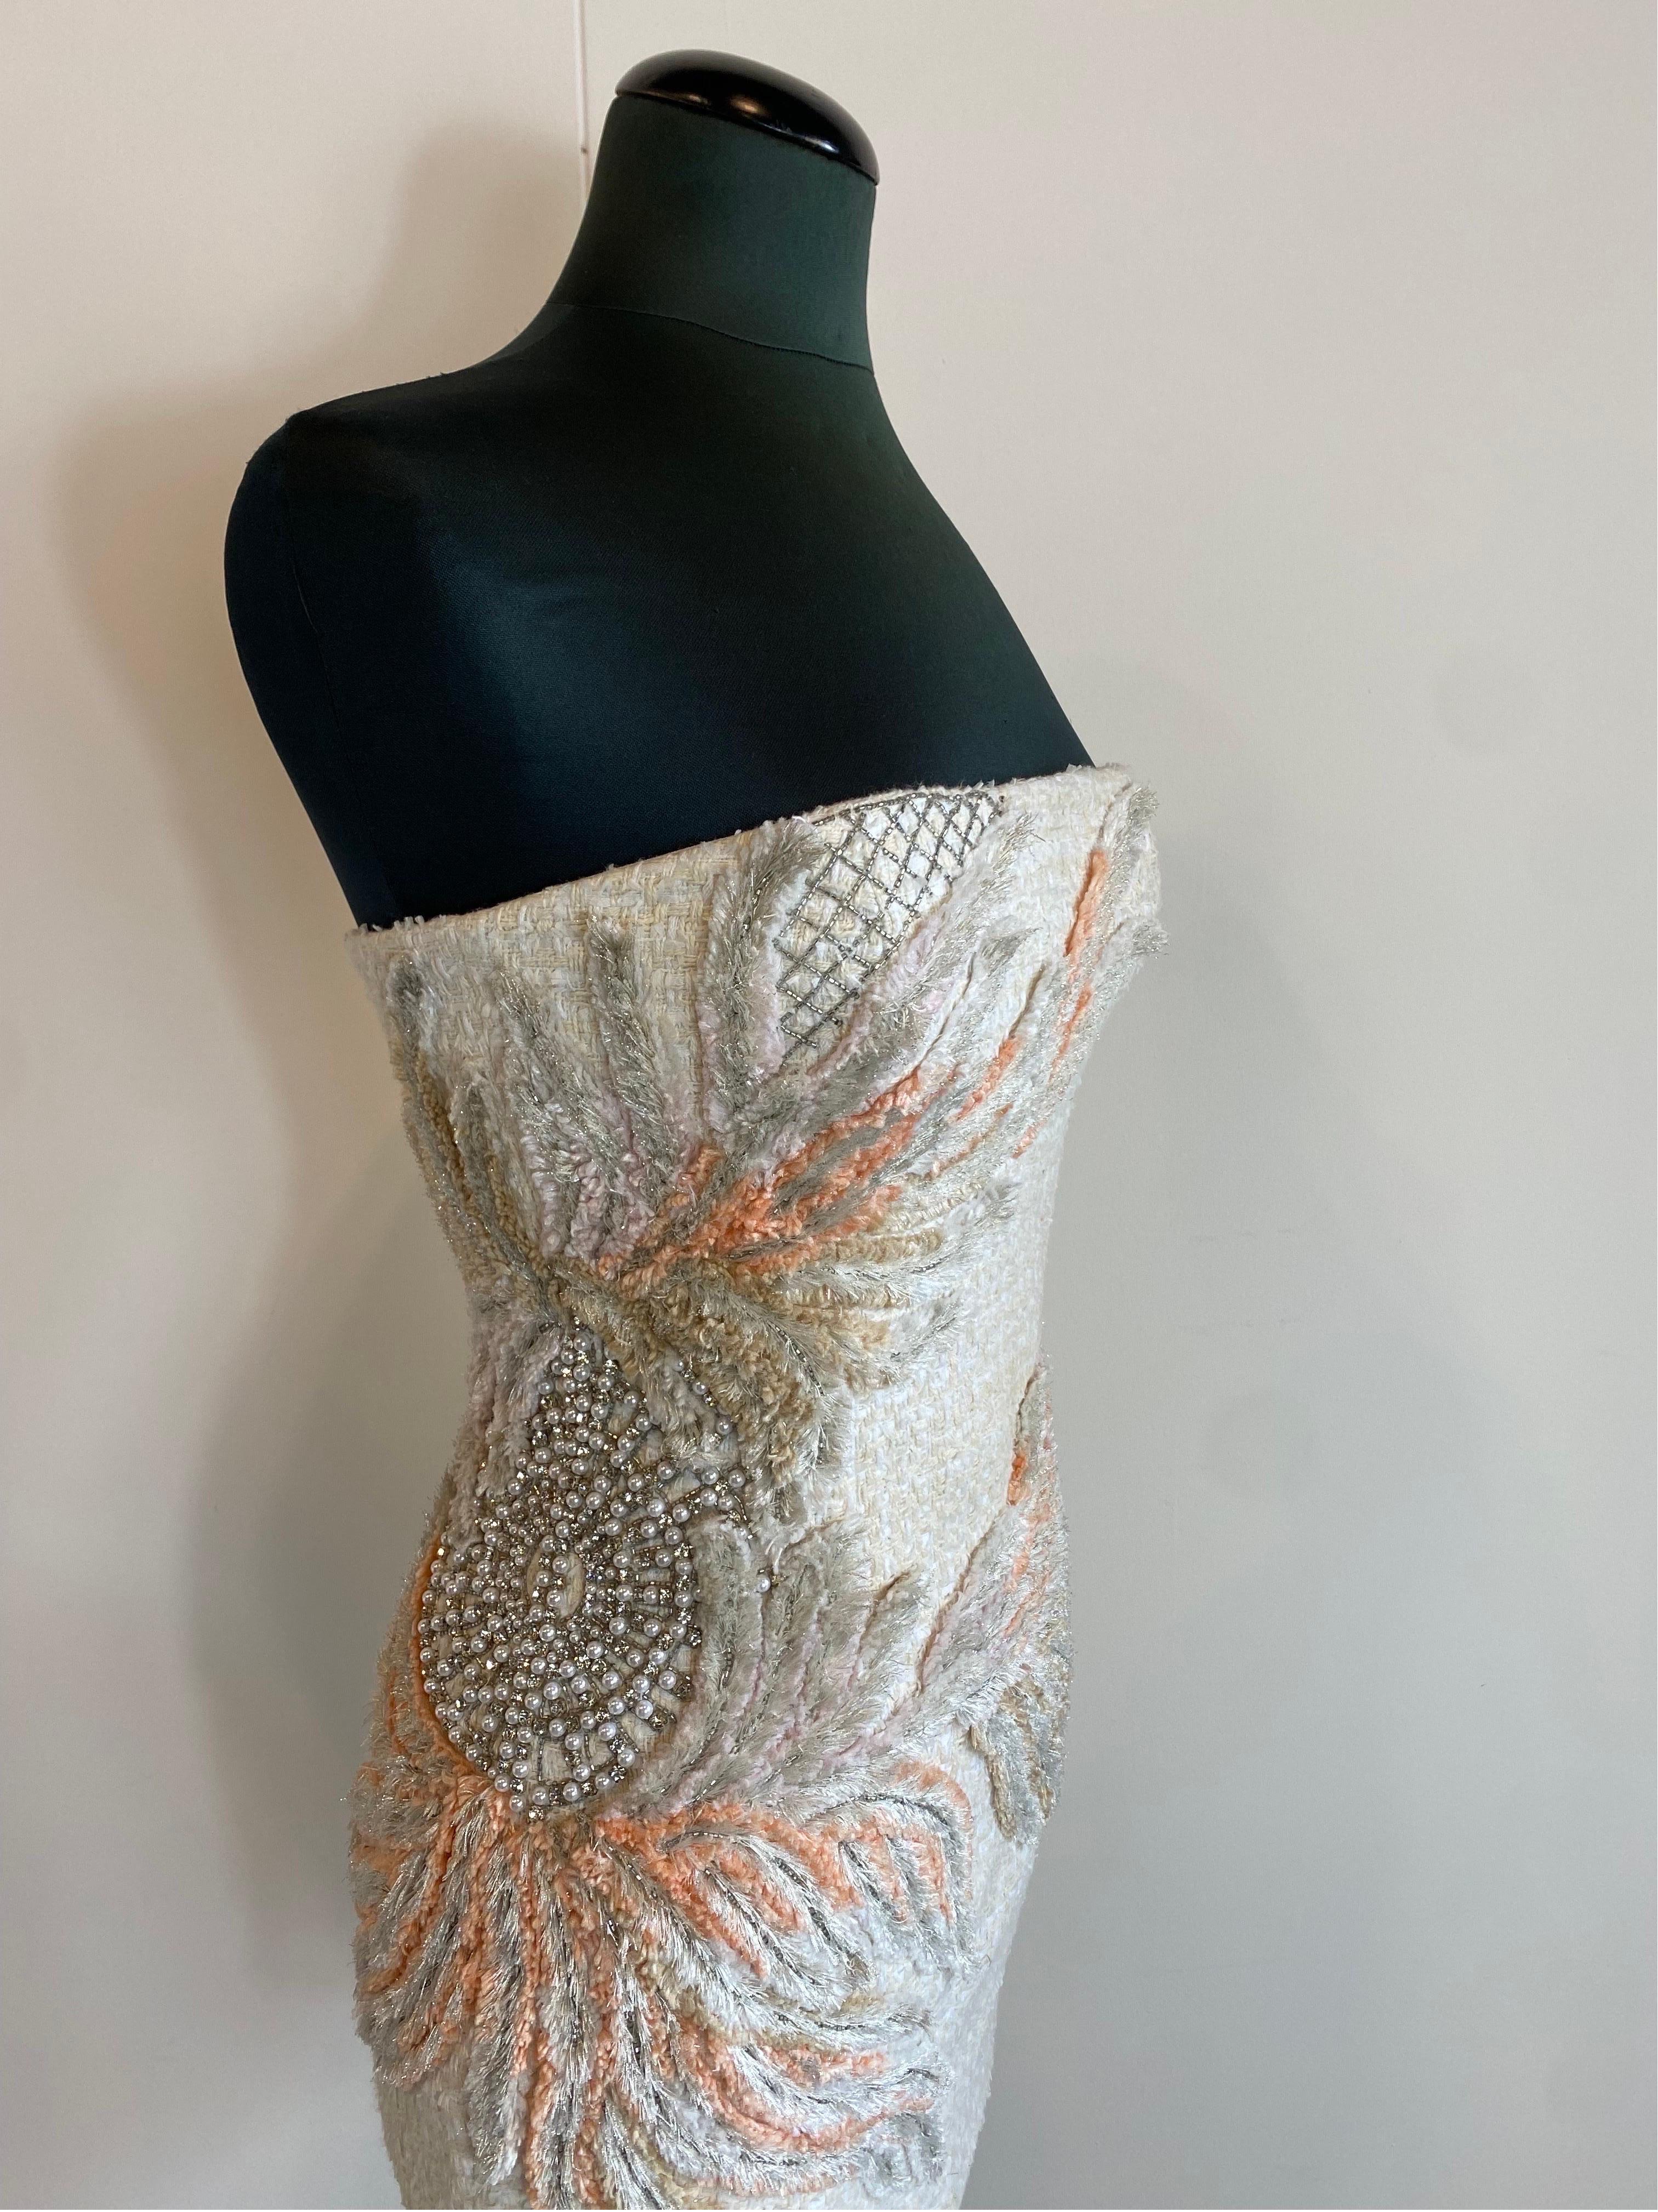 Balmain tweed dress with rhinestones
Made of cotton, elastane, polyamide and viscose.
With rhinestone, beads and all-over lurex pattern. Super worked.
Internal part of the bra rigid to maintain shape.
Without straps.
Wonderful and elegant. With zip